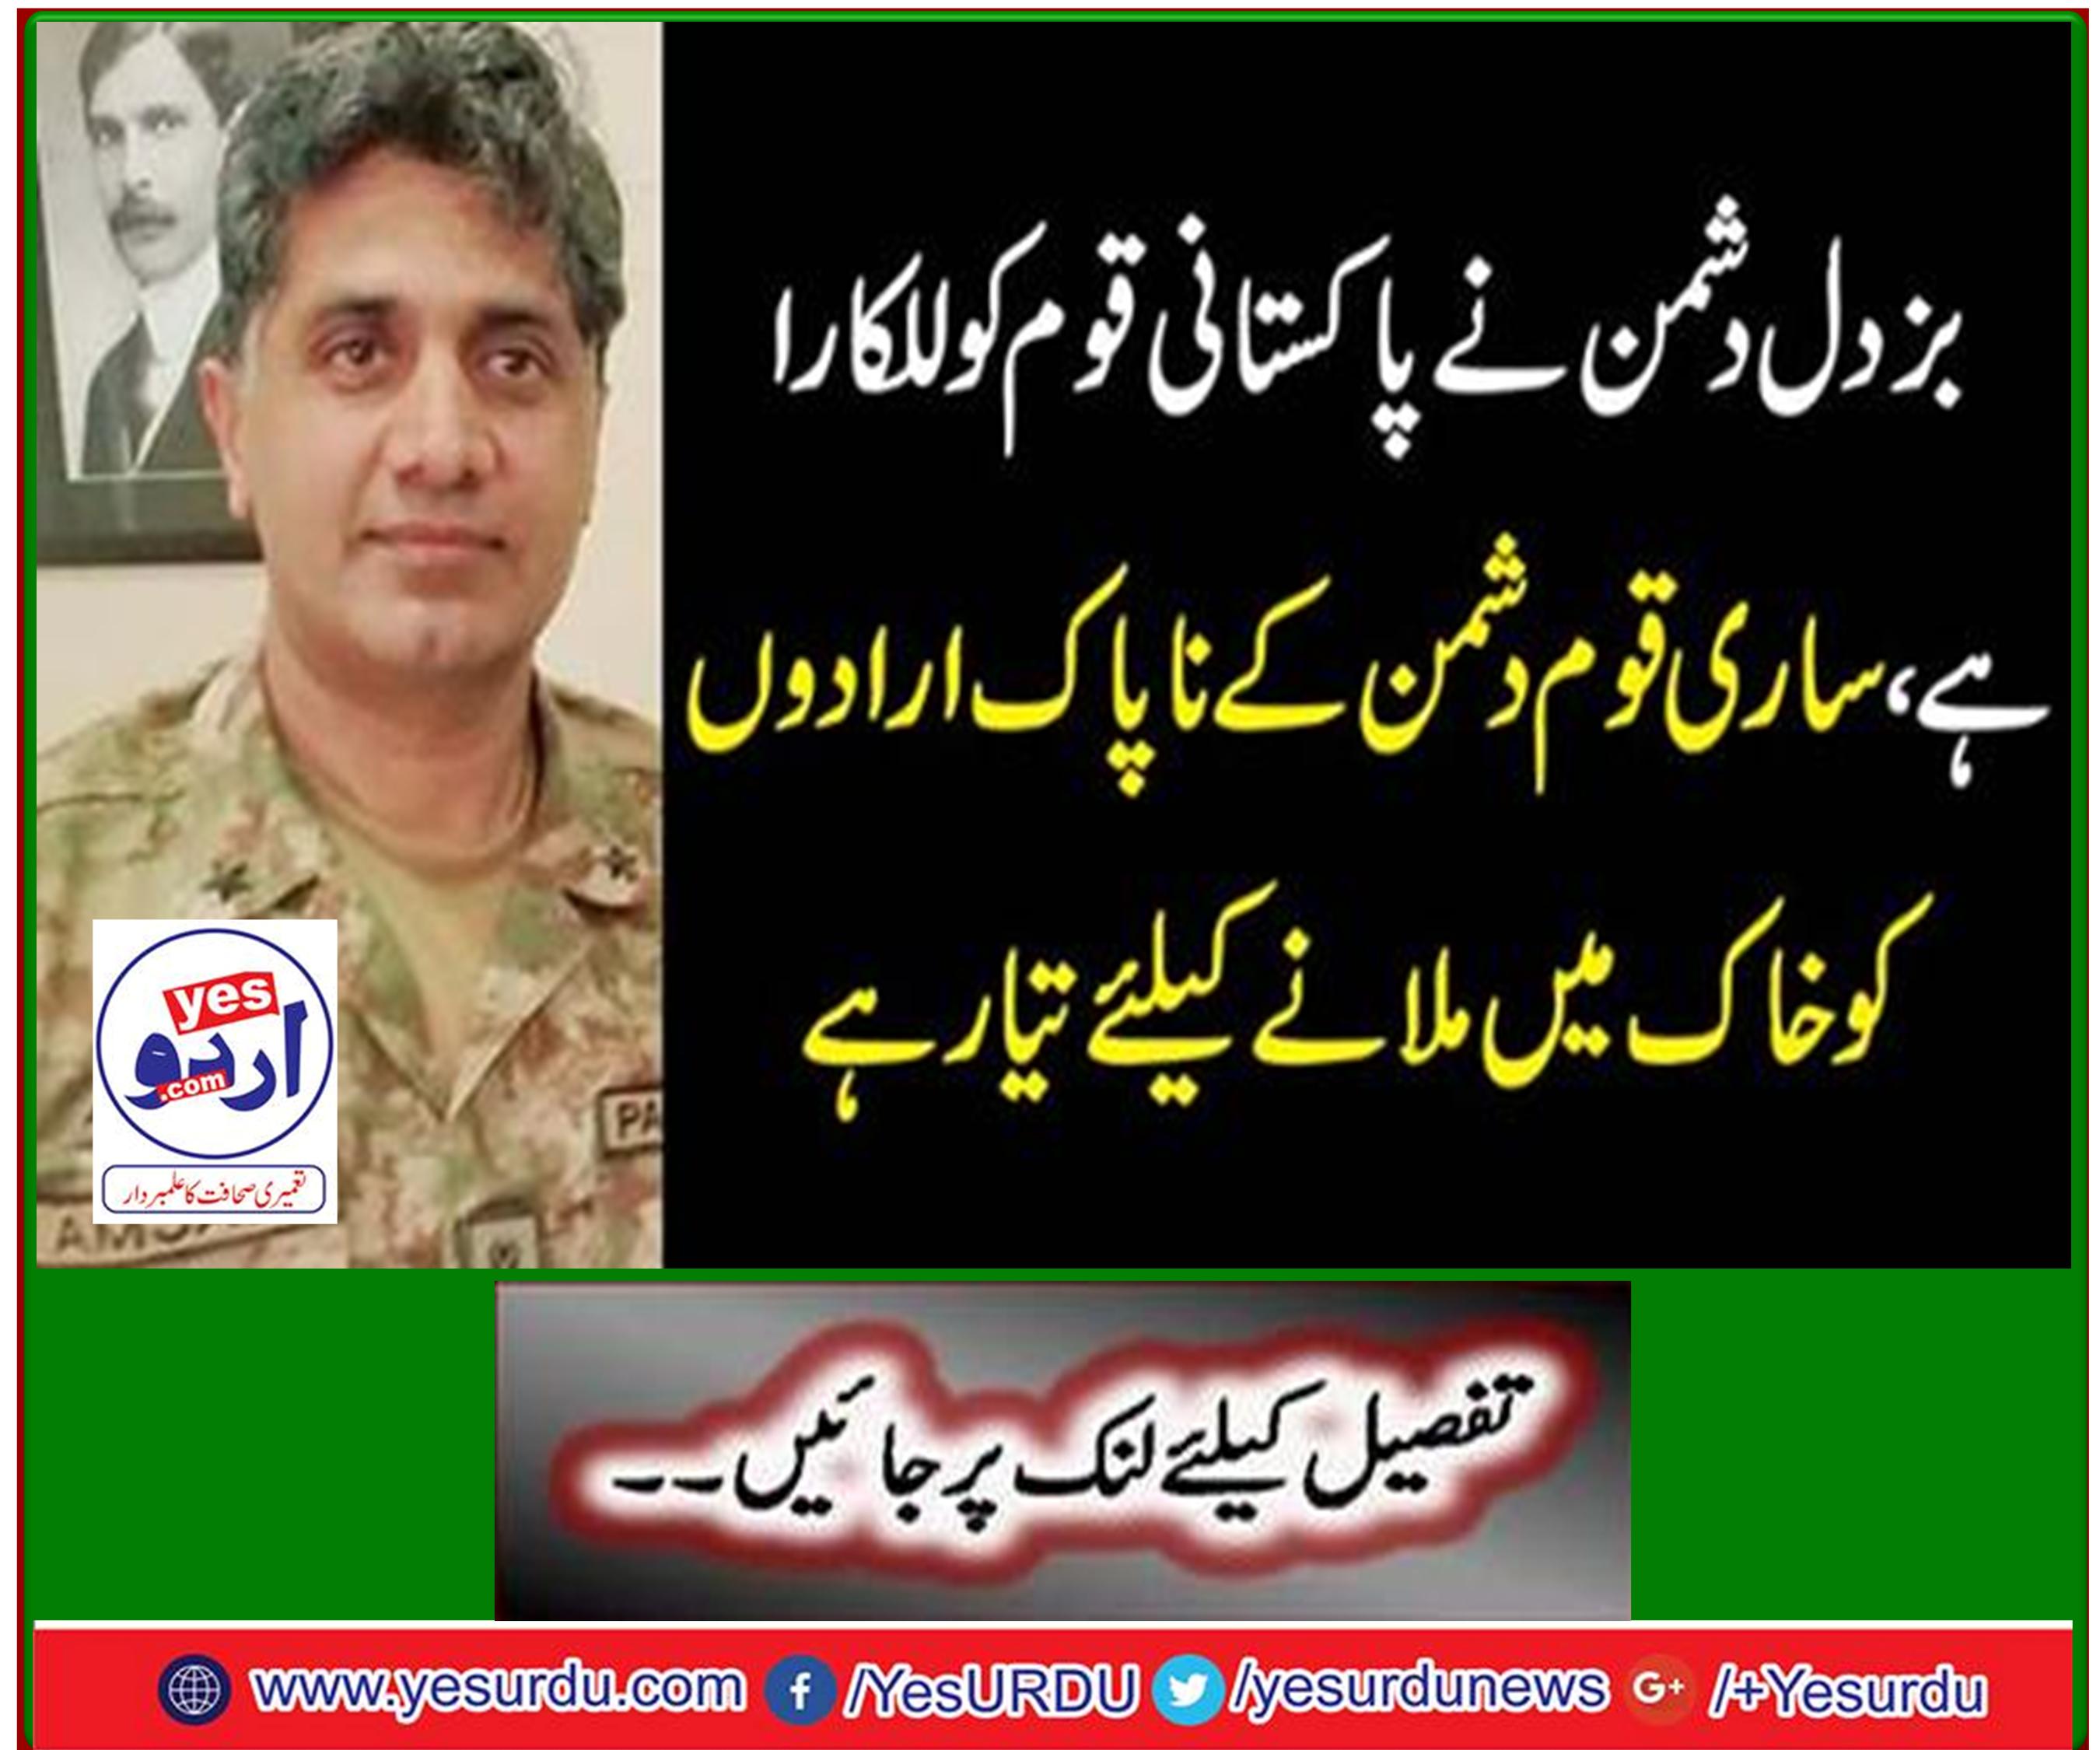 Whole nation ready to unmask the enemy's unclean intentions: Brigadier Amjad Iqbal